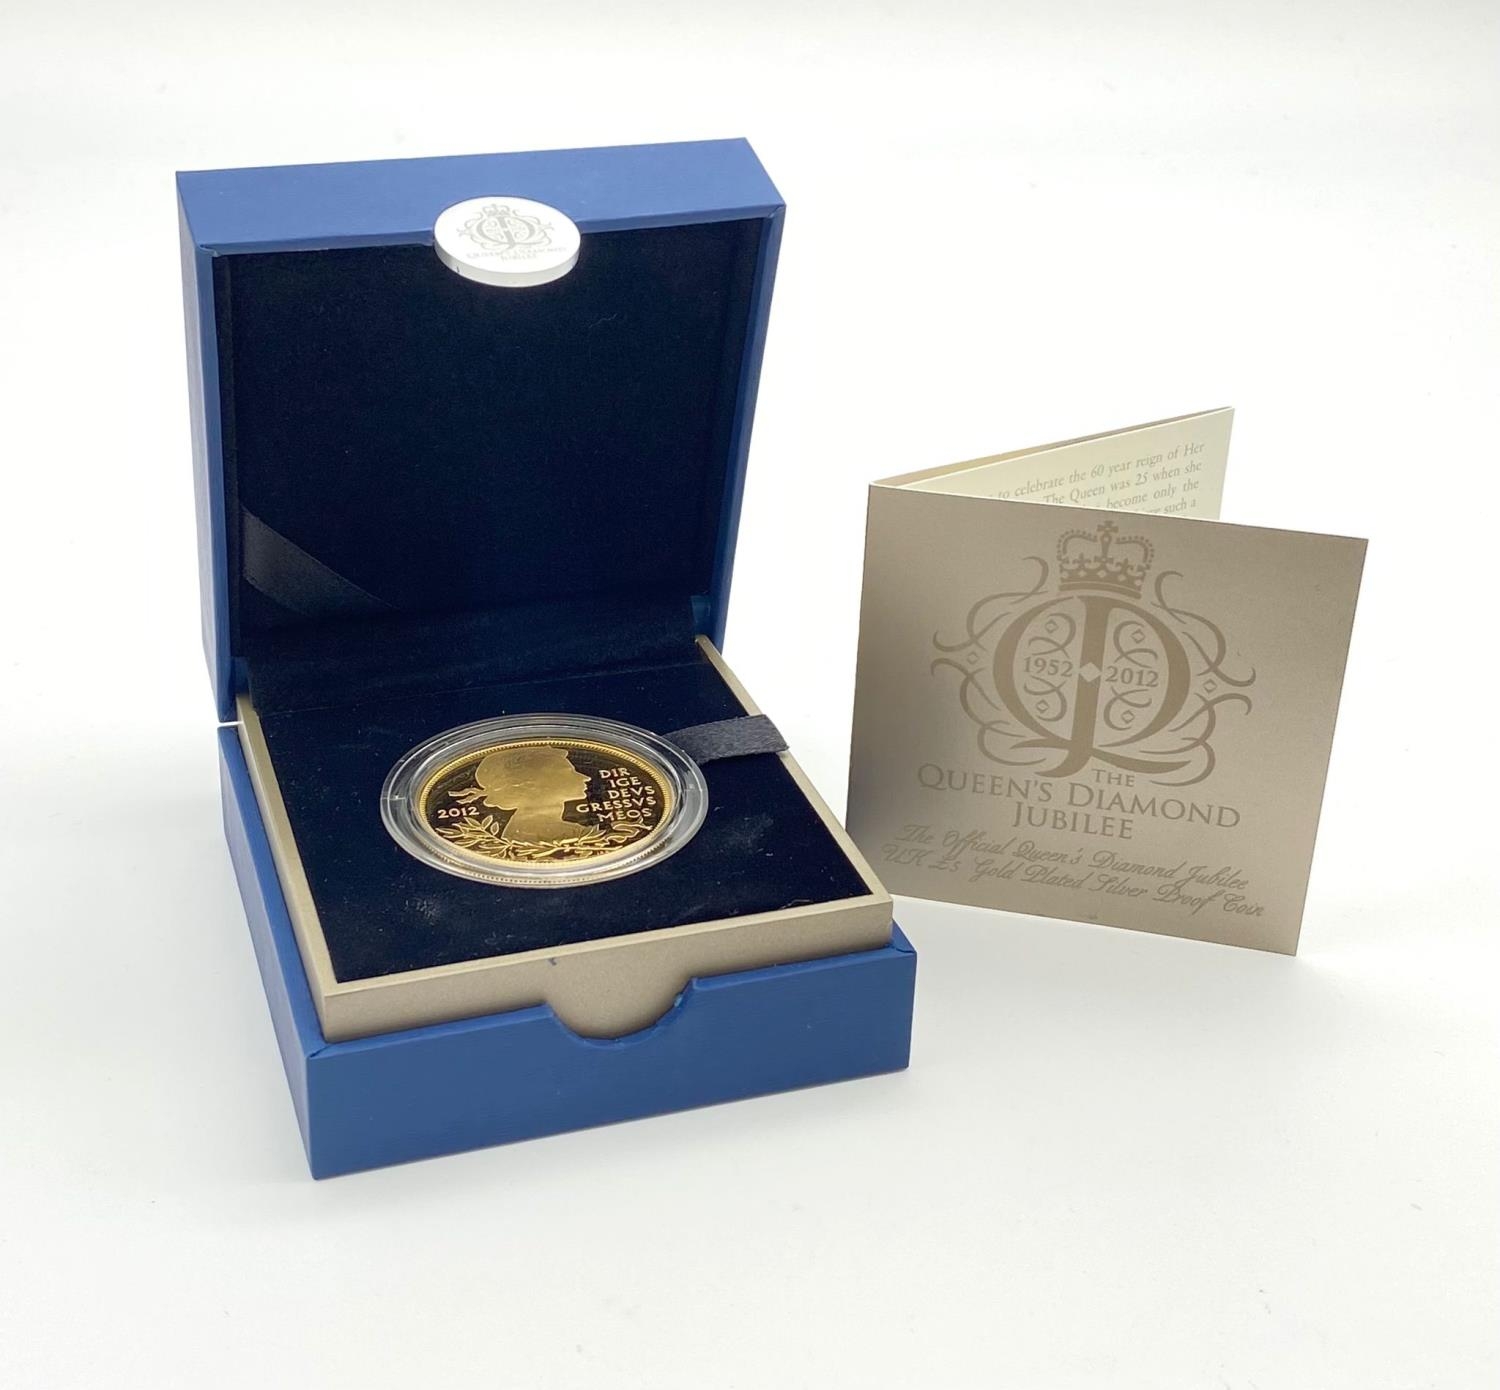 The Royal Mint Queen's Diamond Jubilee Silver (gold plated) £5 Commemorative Coin. Comes in